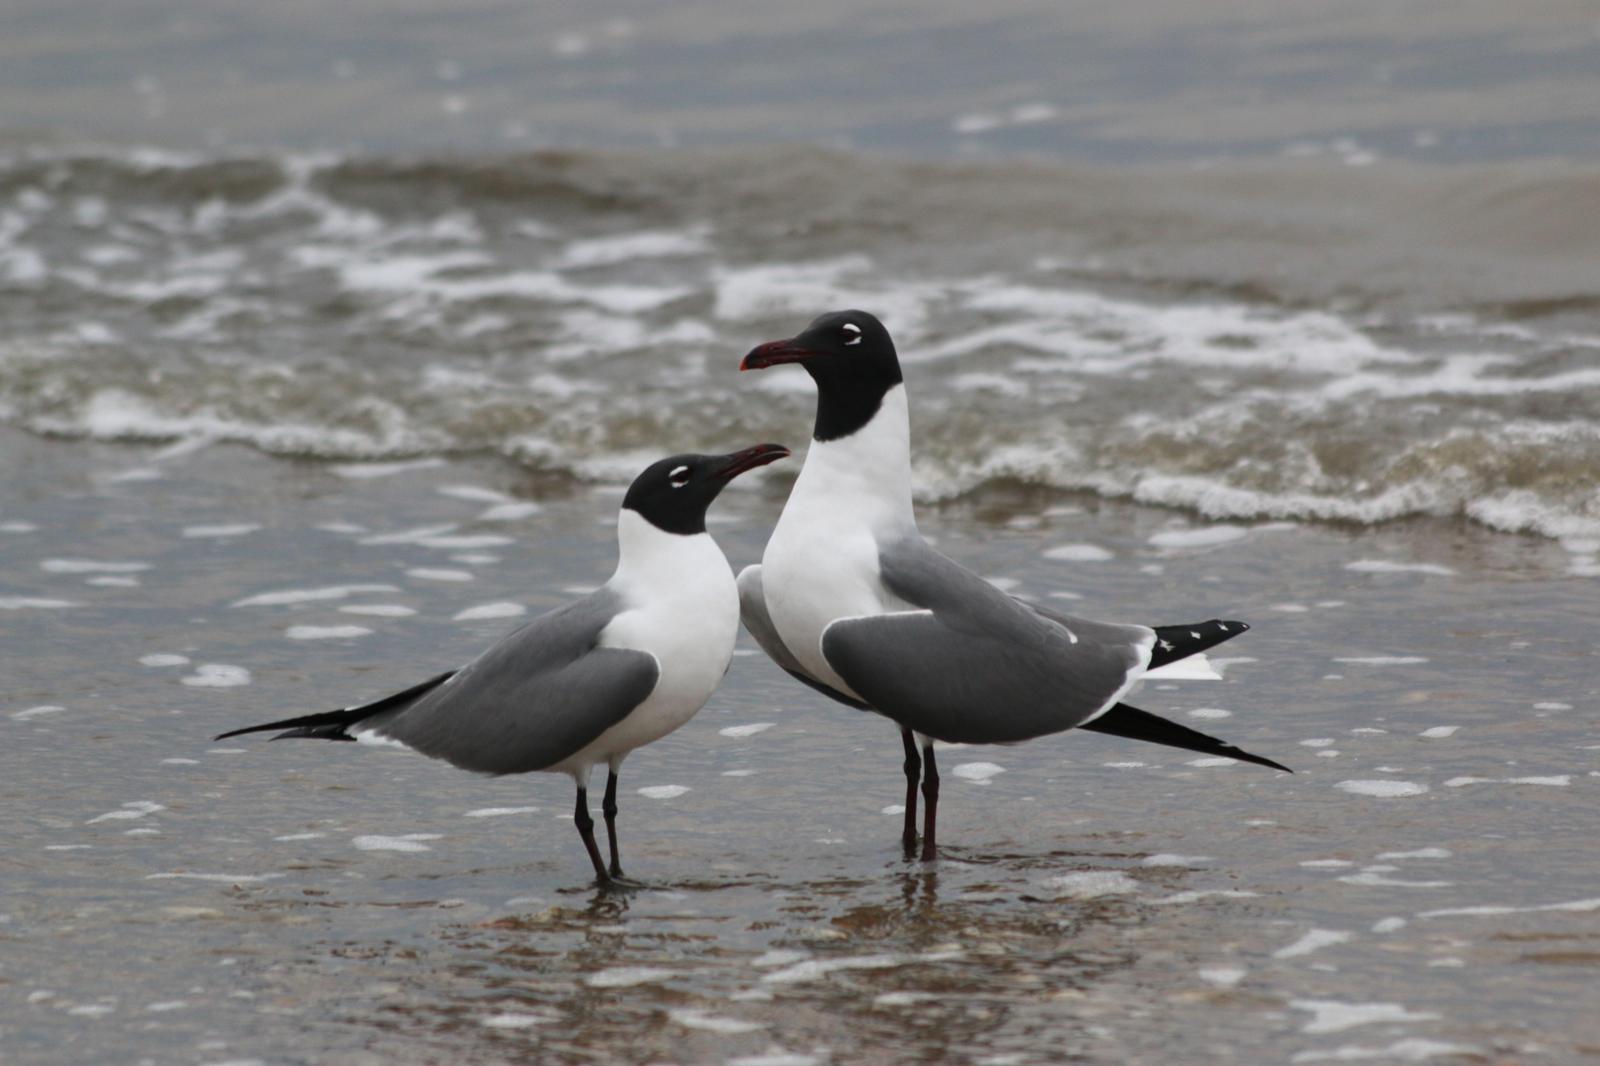 Laughing Gull Photo by Peter Bergeson